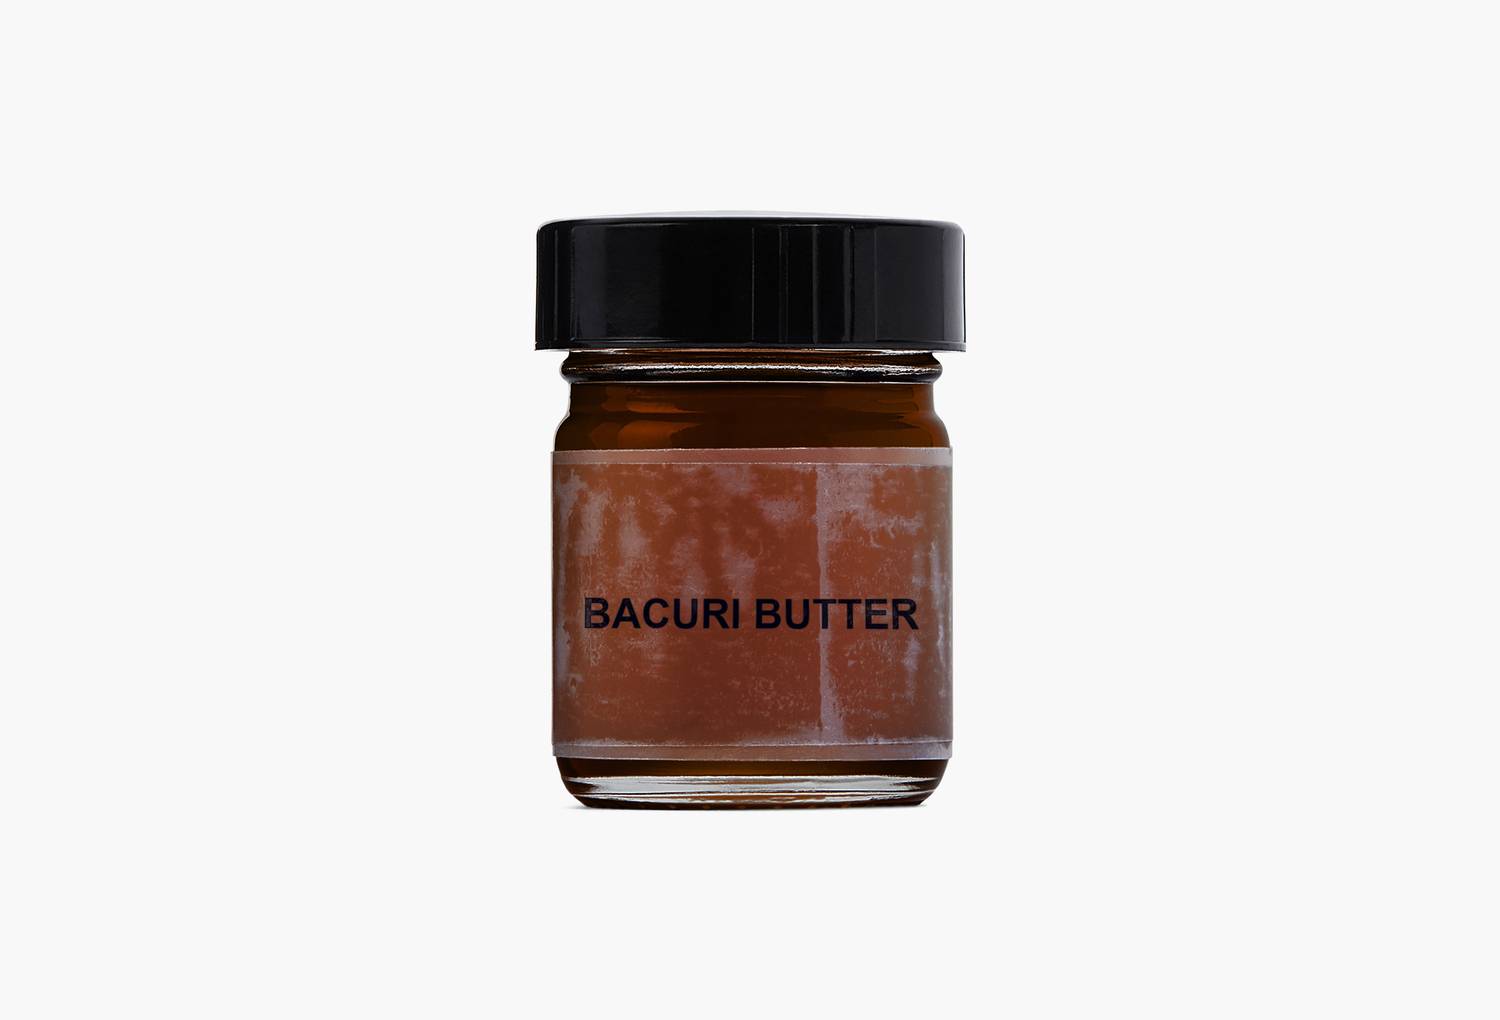 Bacuri Butter in natural form